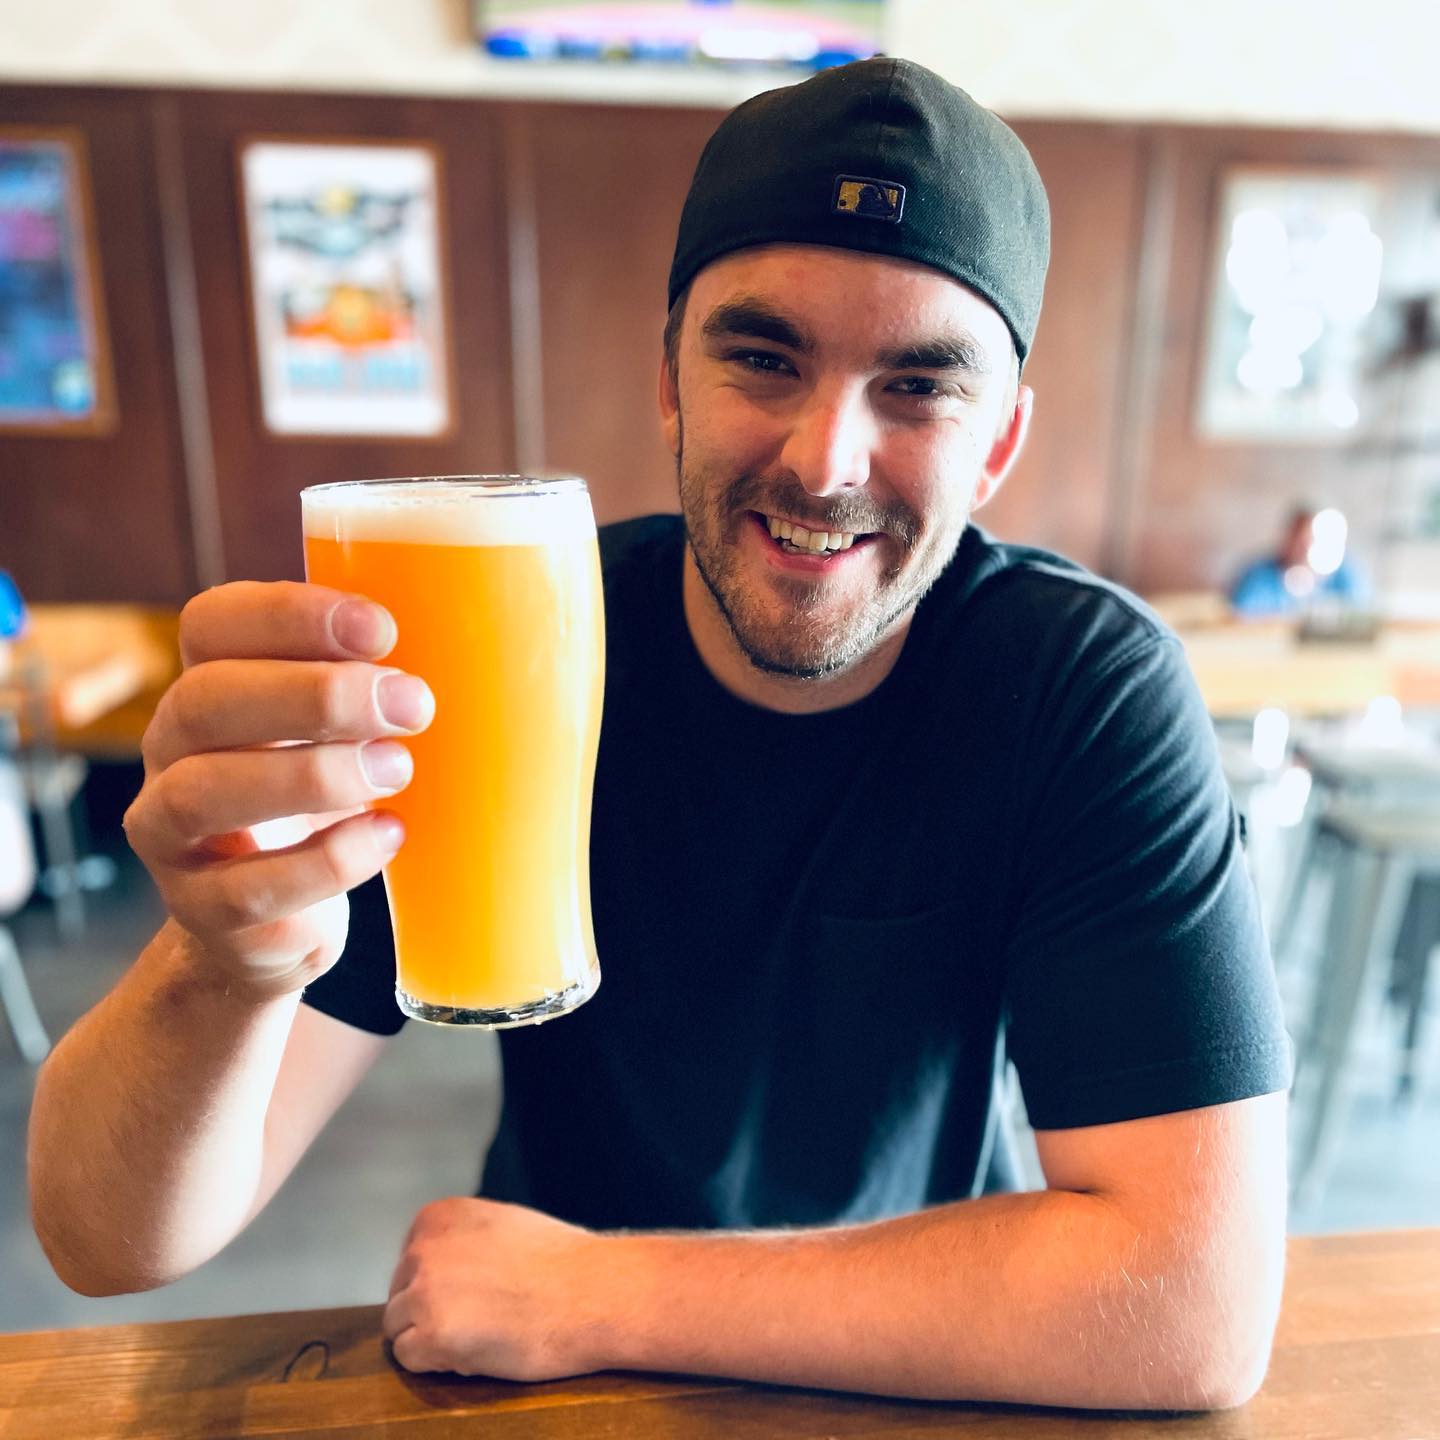 Today is Eric’s last day with us before he heads back to his hometown in Colorado to work at his family’s brewery @battle_mountain_brew. Come by today any time after 4pm to wish him well!
.
We appreciate you Eric, thanks for all that you have brought to Wildwood!
.
.
.
.
.
#wildwoodtaphouse #wildwood #wildwoodtap #lastday #goodbyes #colorado #ihopeyouhadthetimeofyourlife #battlemountainbrewing